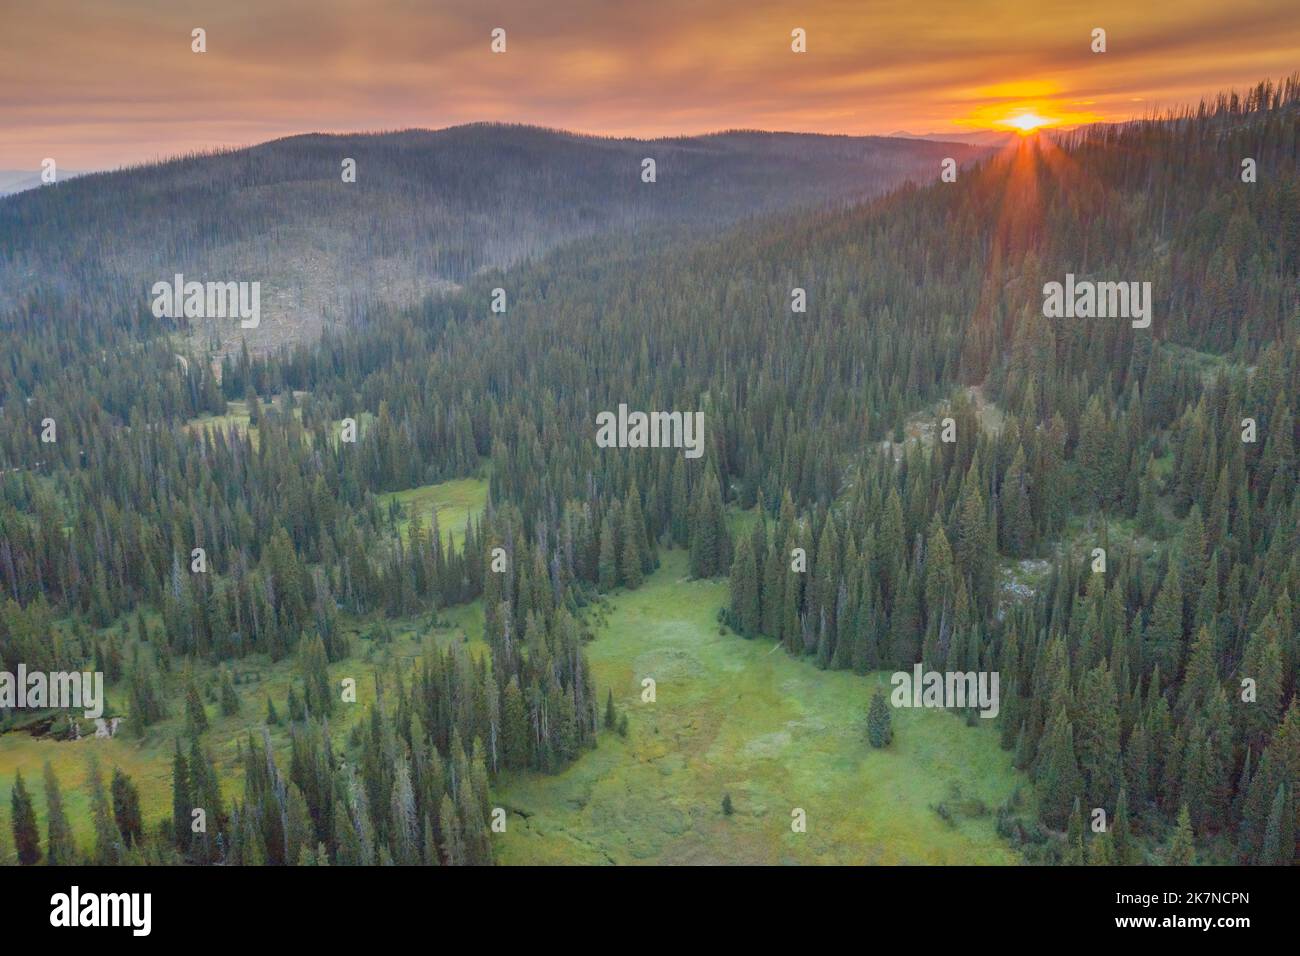 Aerial of Sunrise over Elk Summit Meadow at Hoodoo Lake, Gateway to Selway-Bitterroot Wilderness, Clearwater National Forest, Idaho County, Powell, Id Stock Photo